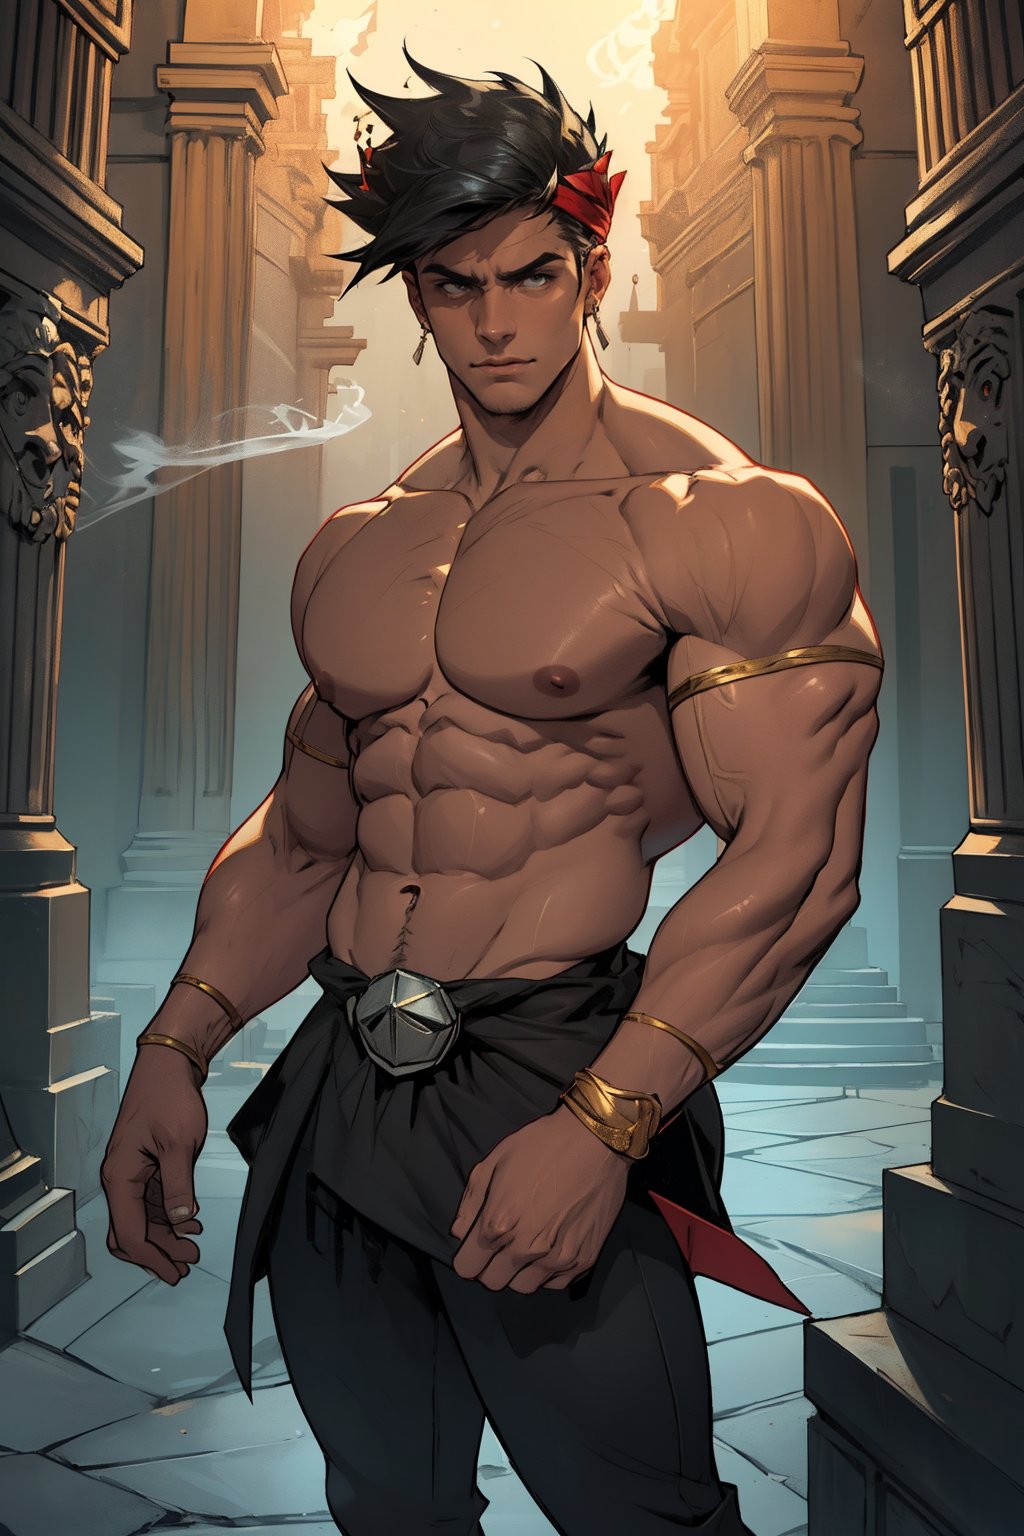 Zagreus stands confidently, massive physique dominating darkened temple's dimly lit chamber, broad shoulders and powerful arms accentuated by shadows, chiseled chest and defined abs seeming to gleam in faint torchlight. Framed by ornate stone columns, Zagreus' piercing gaze casts unyielding glare, commanding attention as ancient incense wafts through air, enveloping the scene in mystique.